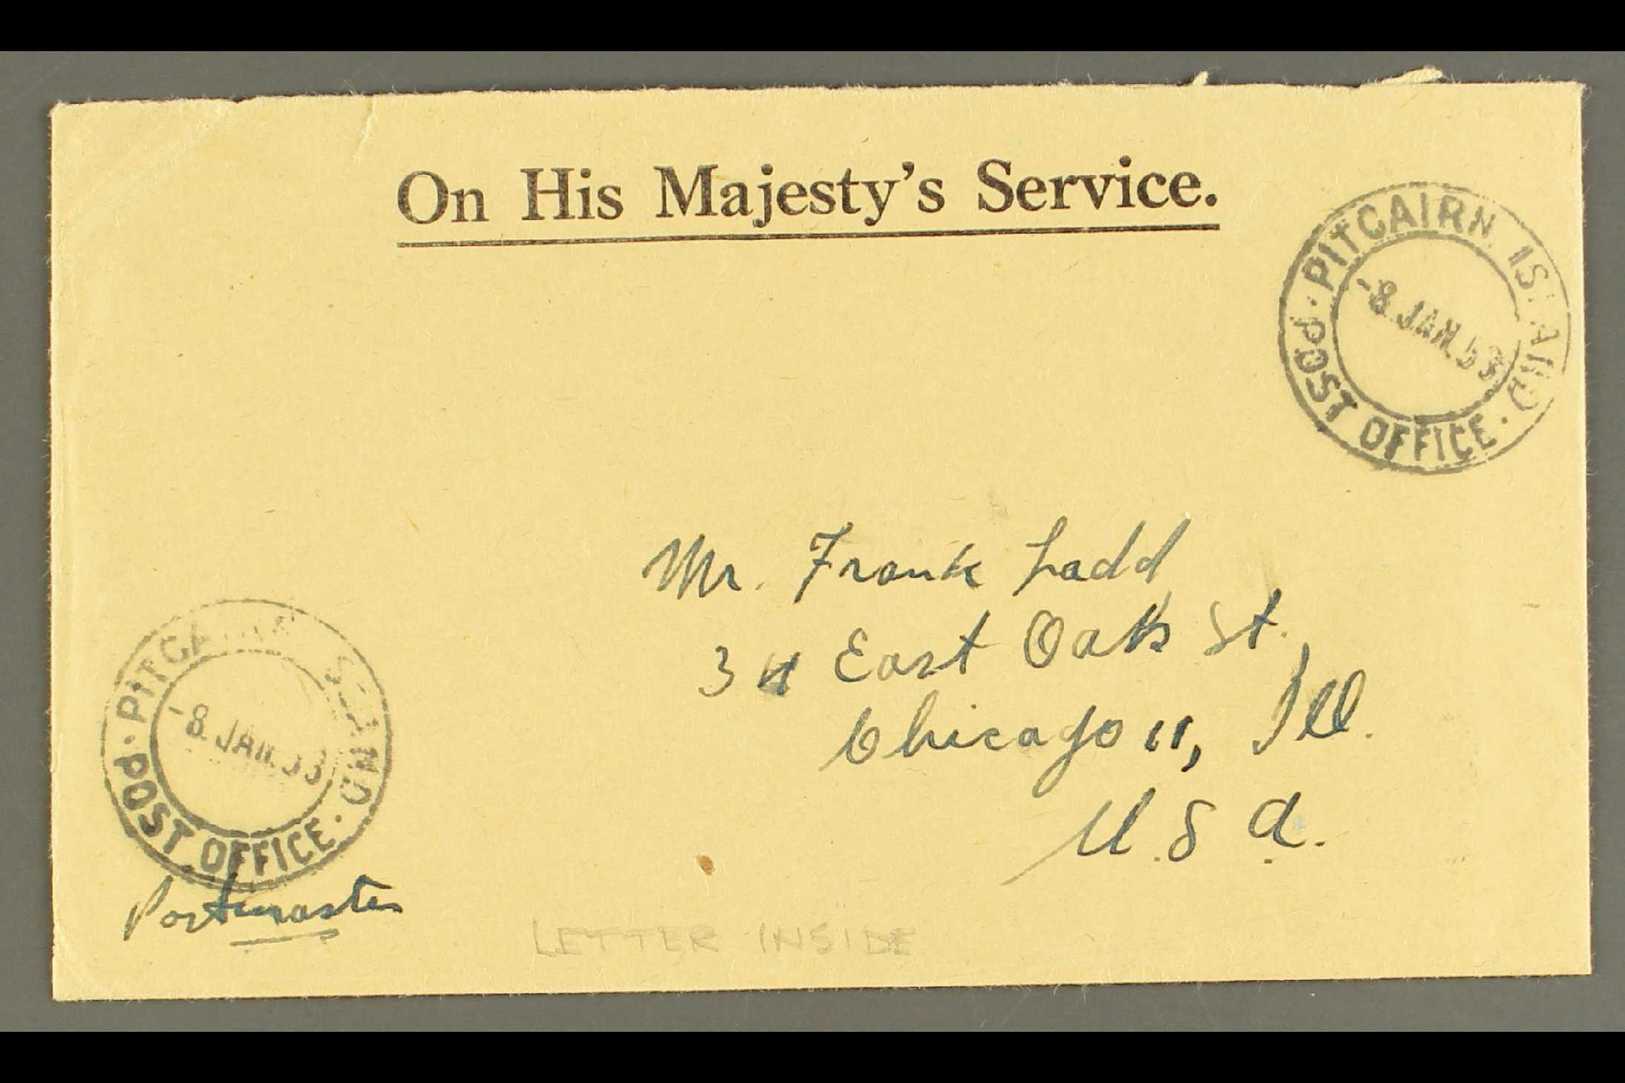 1953  (8 Jan) Stampless Printed 'OHMS' Envelope To Chicago With Two Fine Strikes Of "Pitcairn Island Post Office" Cds, E - Pitcairn